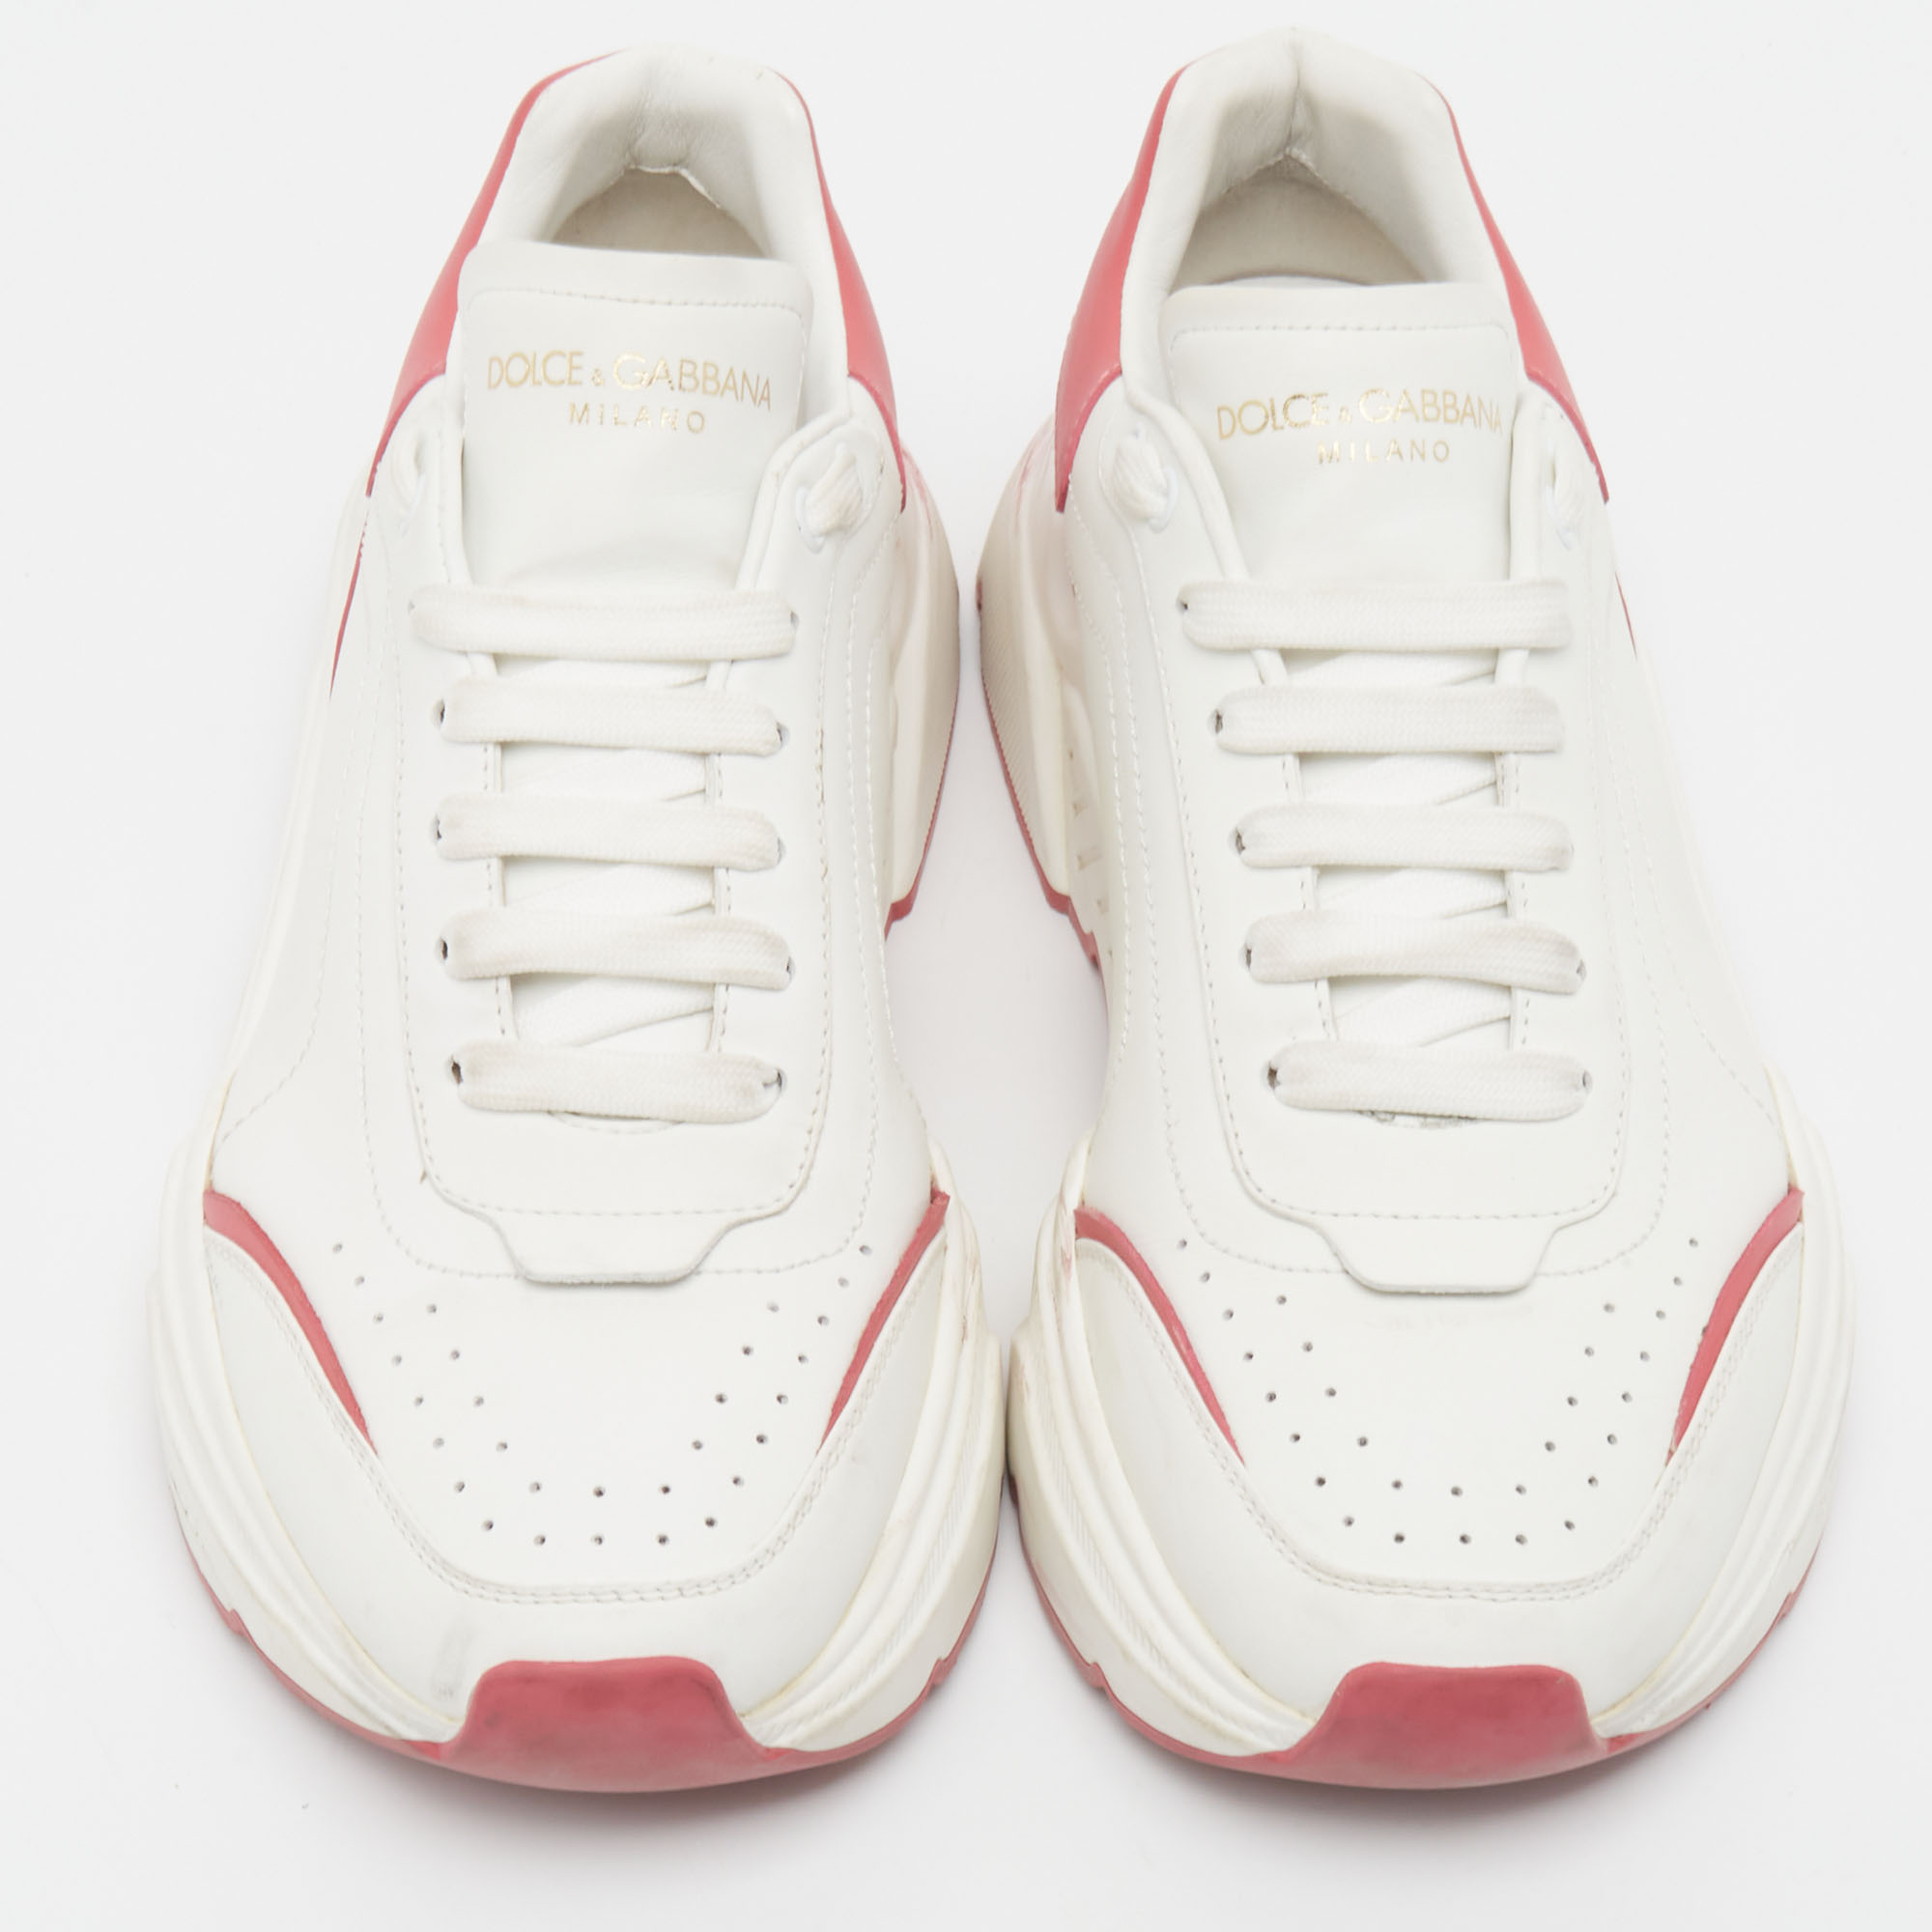 Dolce & Gabbana White/Pink Leather Daymaster Sneakers Size 41